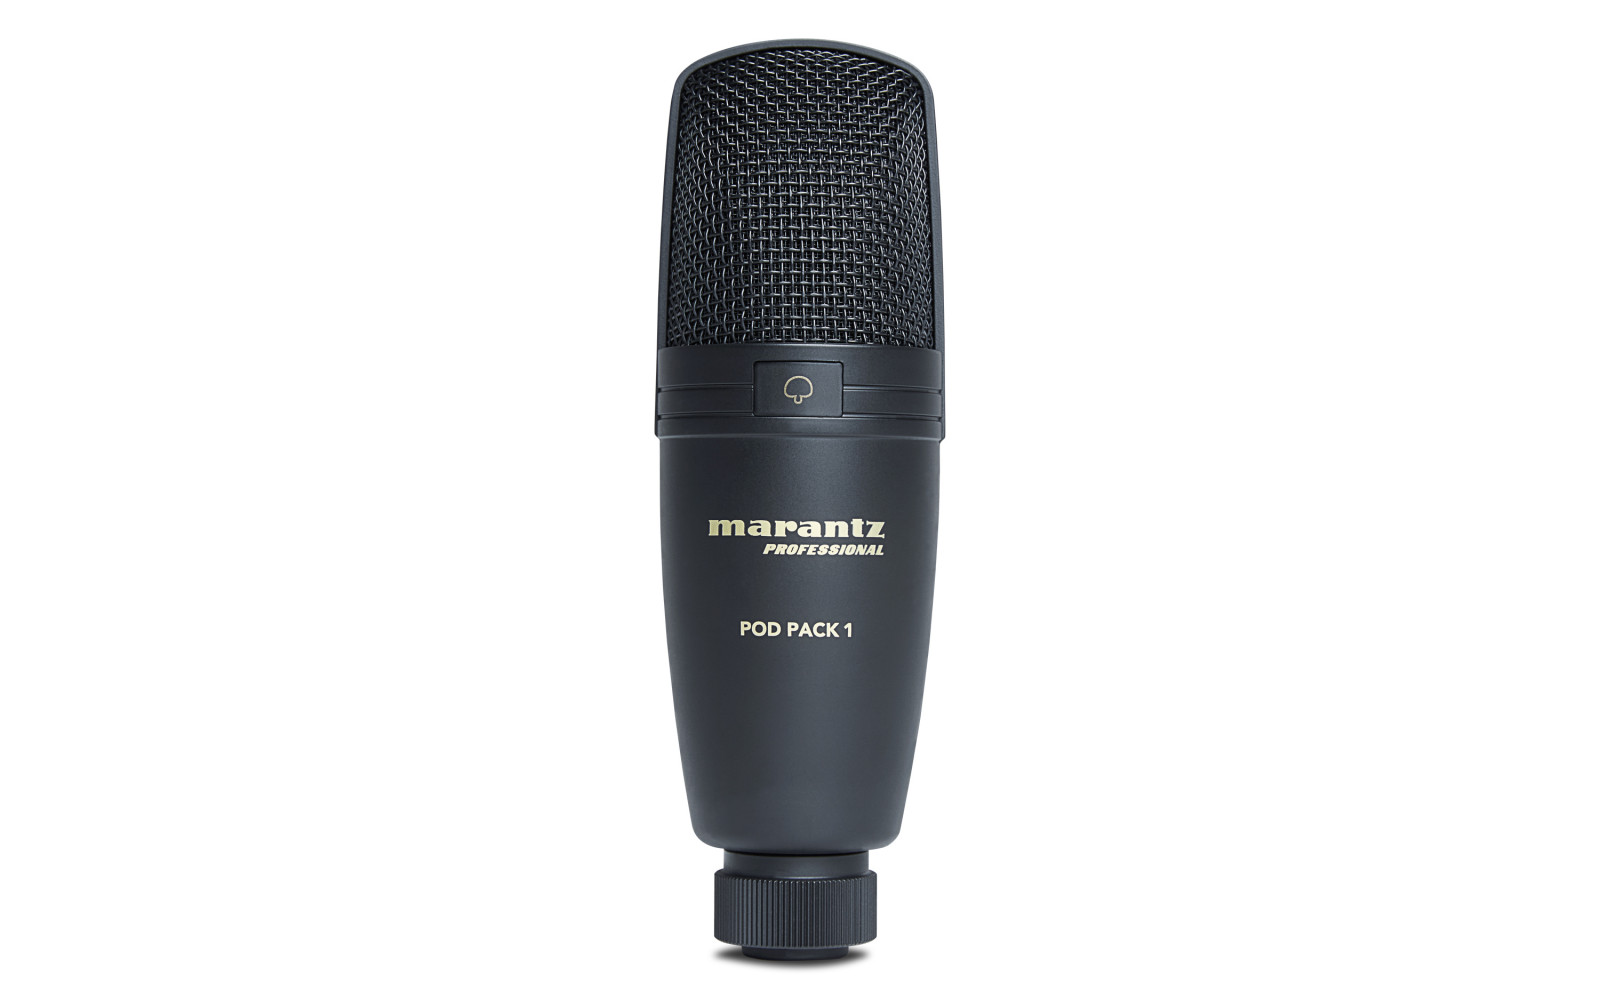 Marantz Professional Pod Pack 1 USB Microphone with Broadcast Stand & Cable